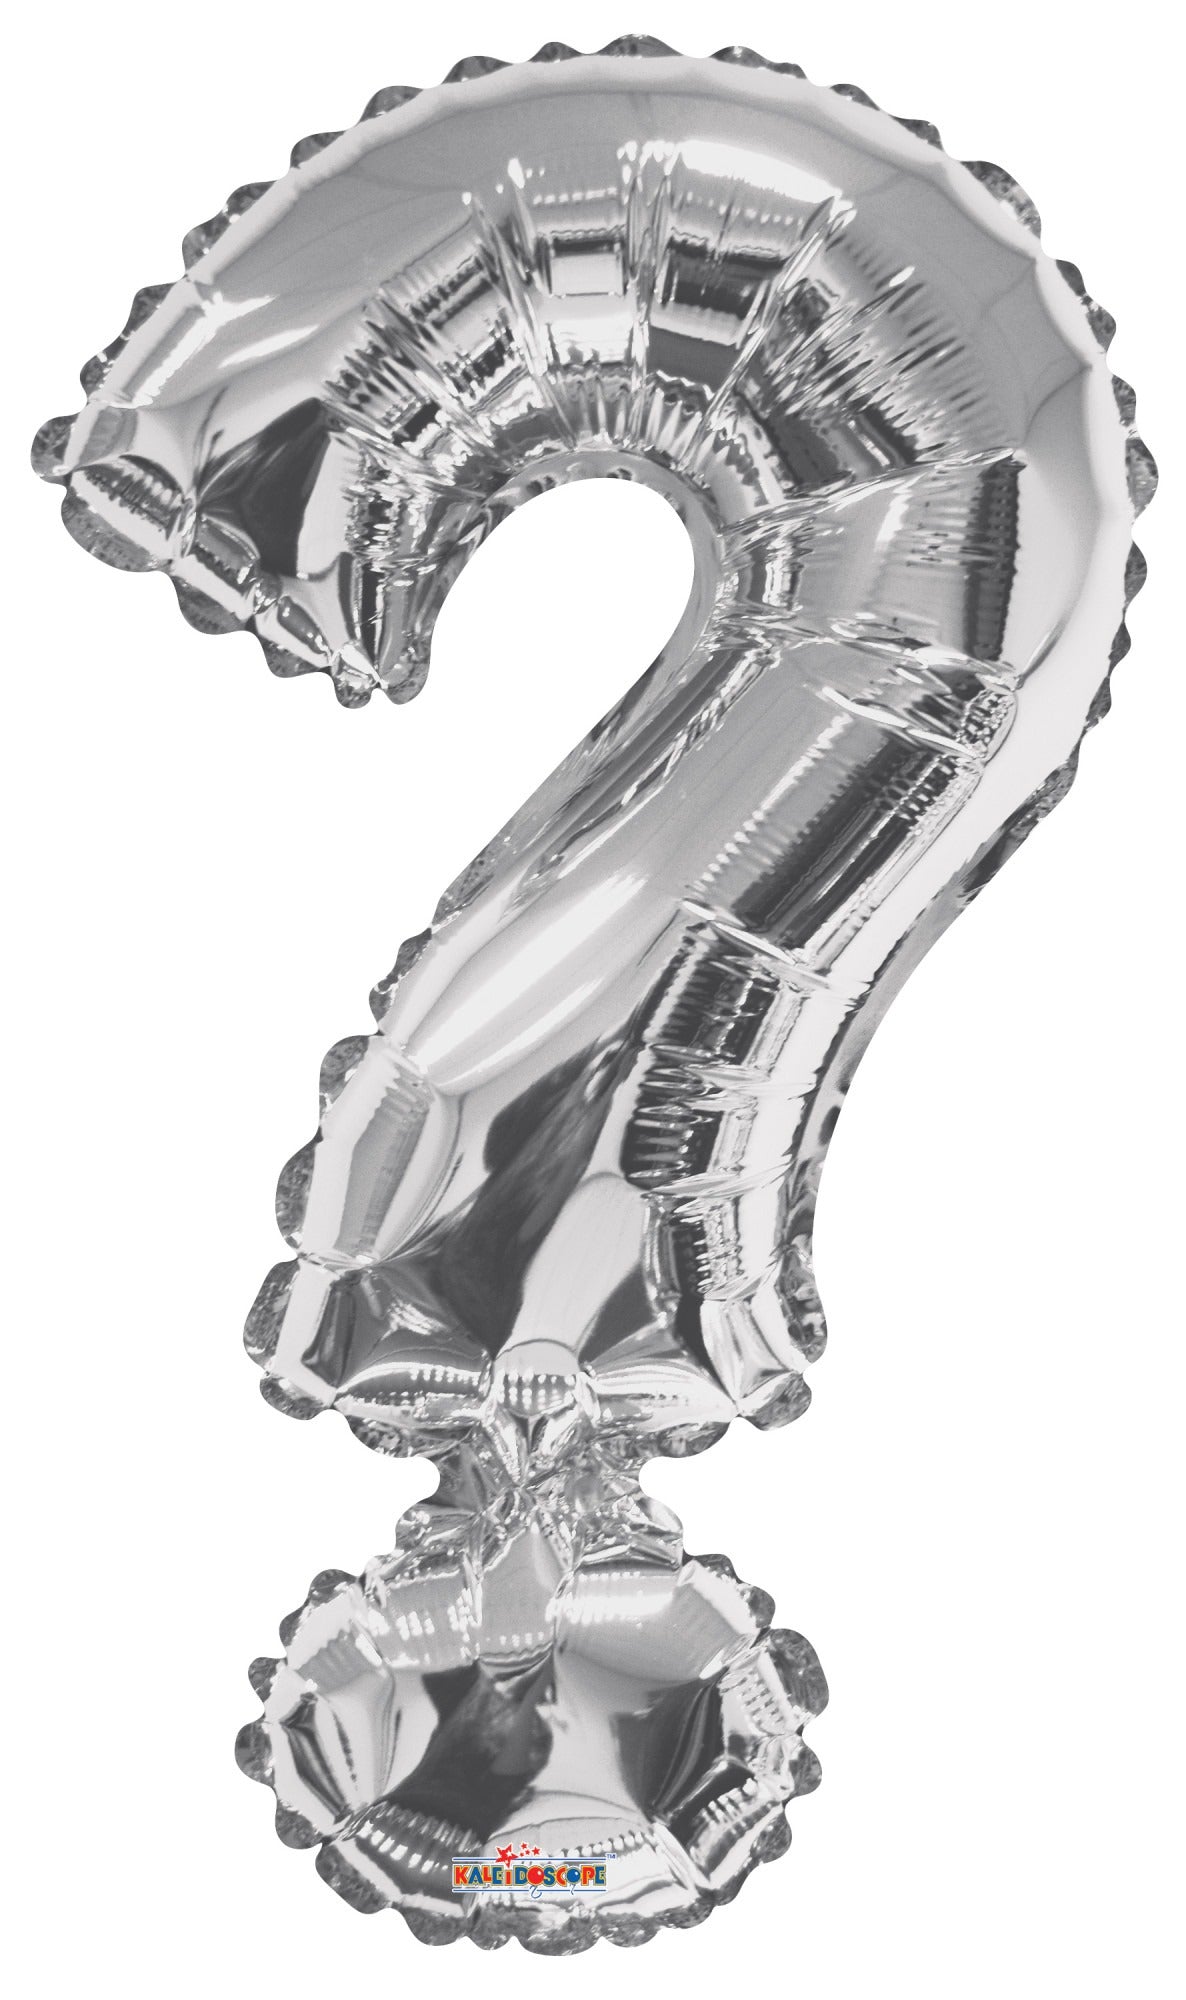 View 34 inch Silver Symbol Balloon information